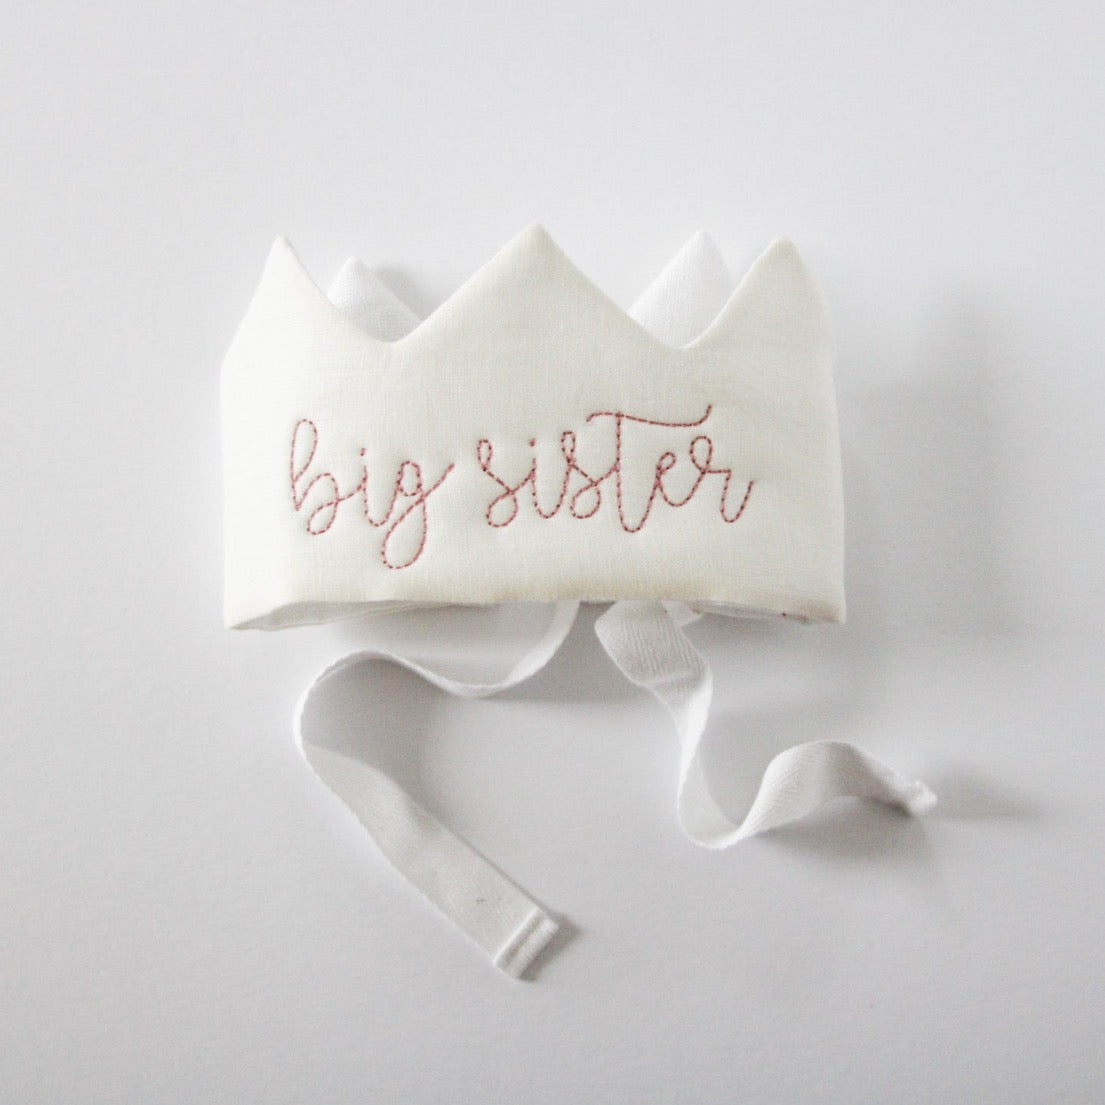 New Big Sister Crown - A Unique & Special Gift for a Proud New Sibling - Madly Wish